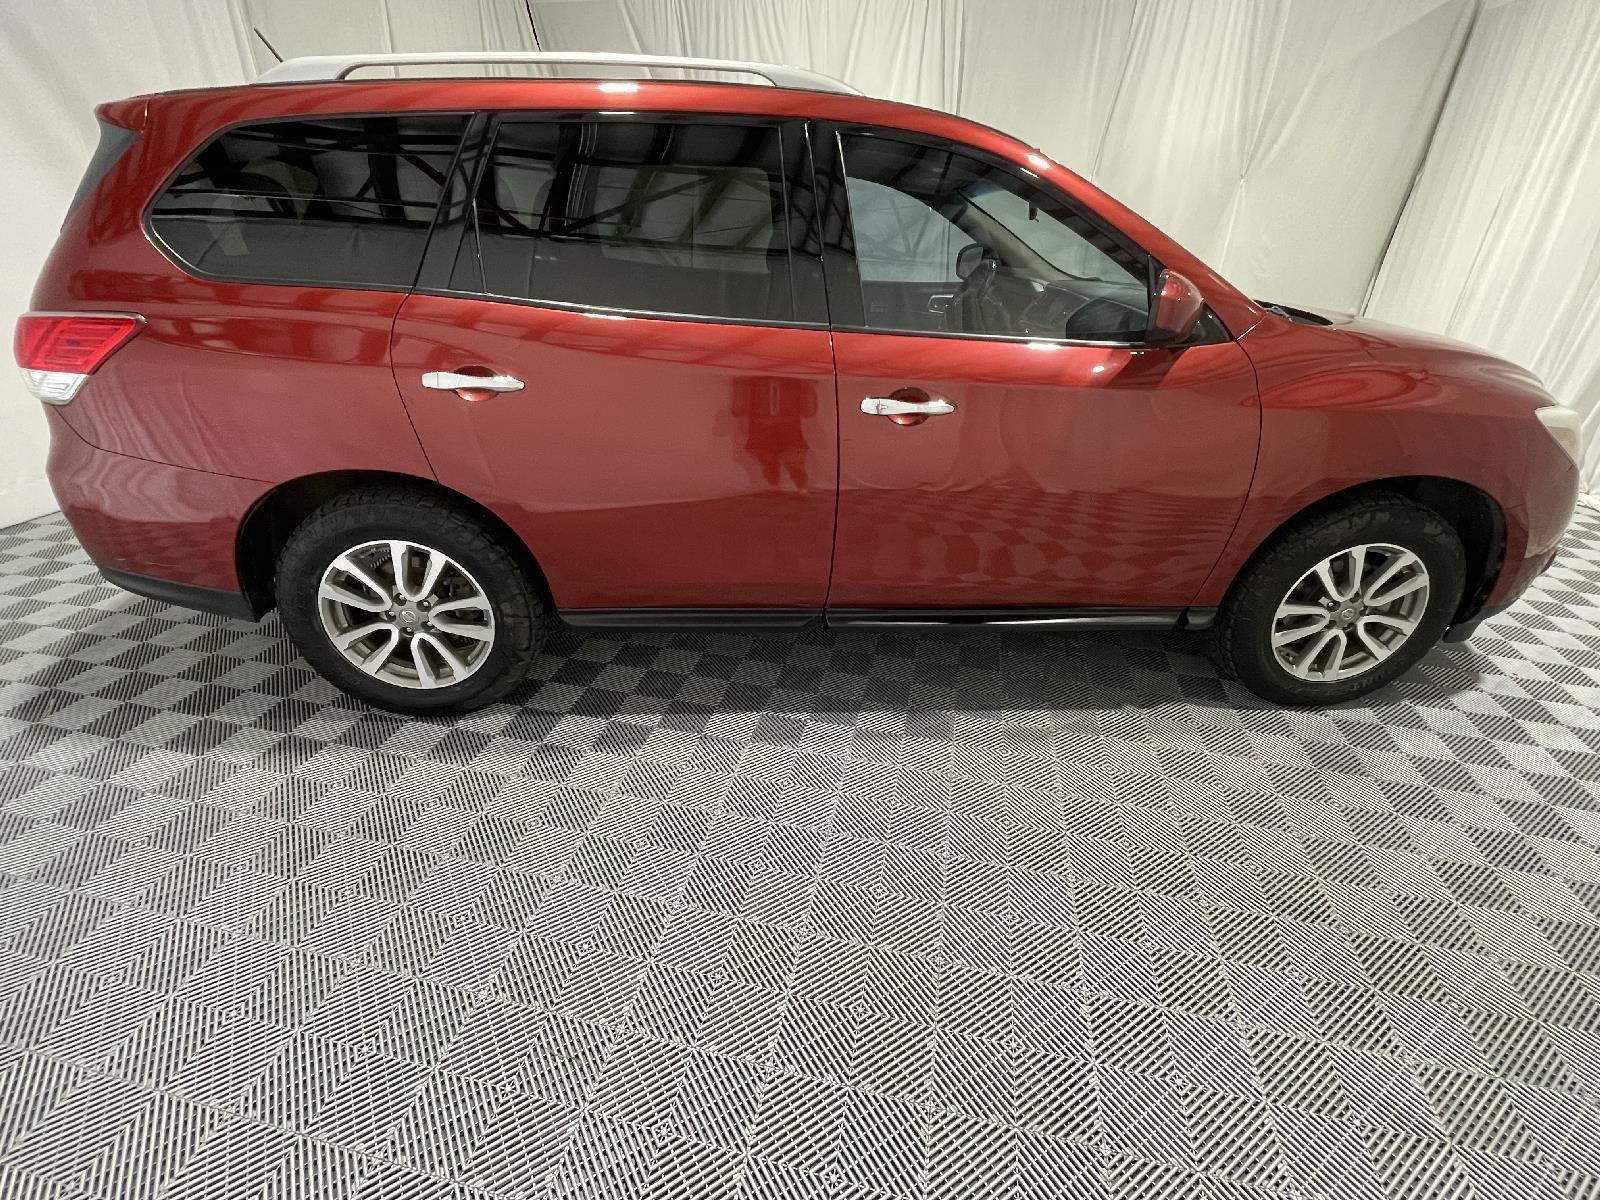 Used 2013 Nissan Pathfinder SV SUV for sale in St Joseph MO